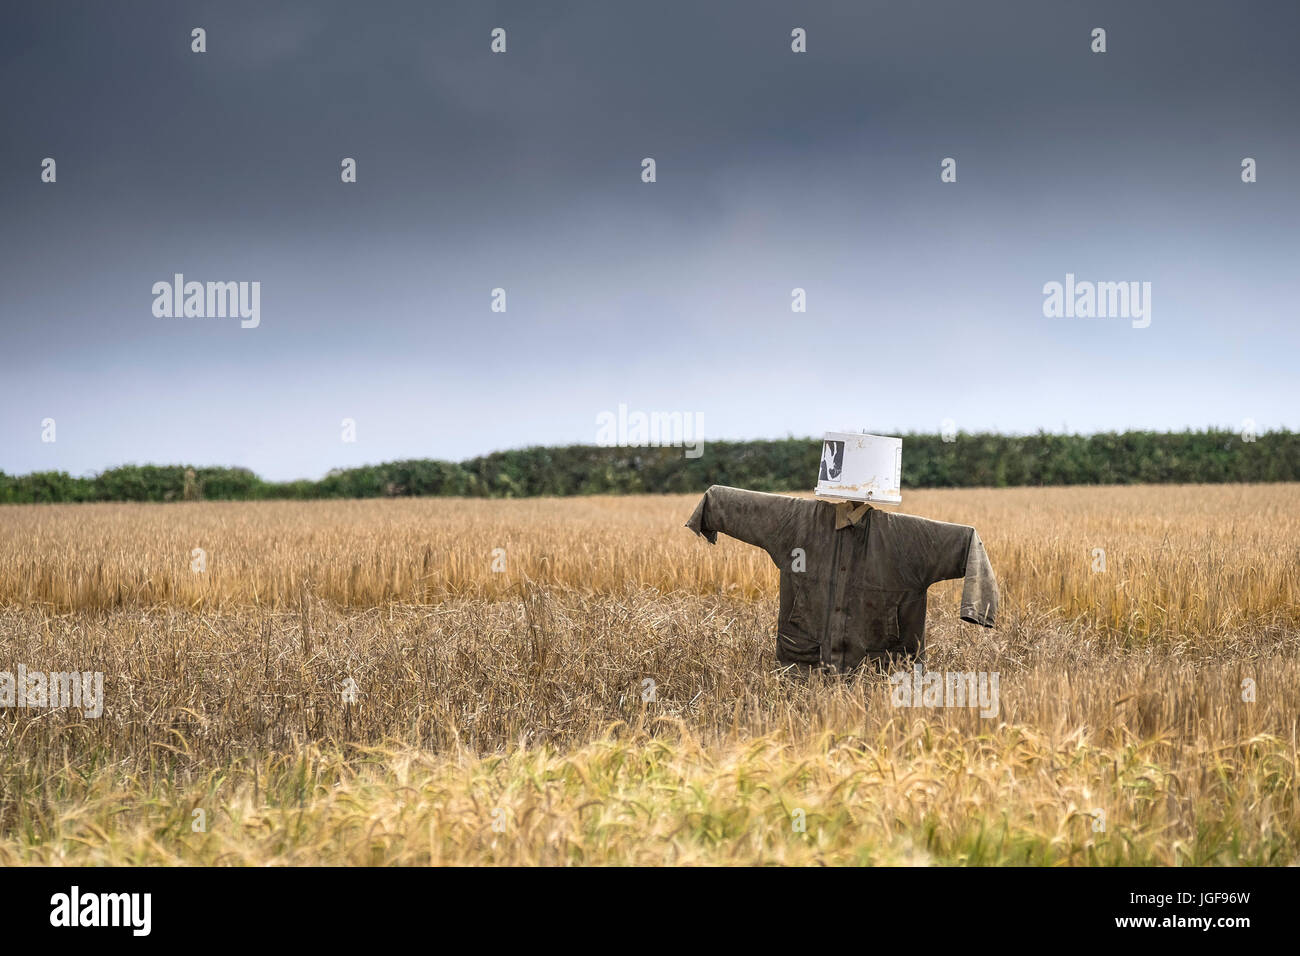 A scarecrow in a field. Stock Photo